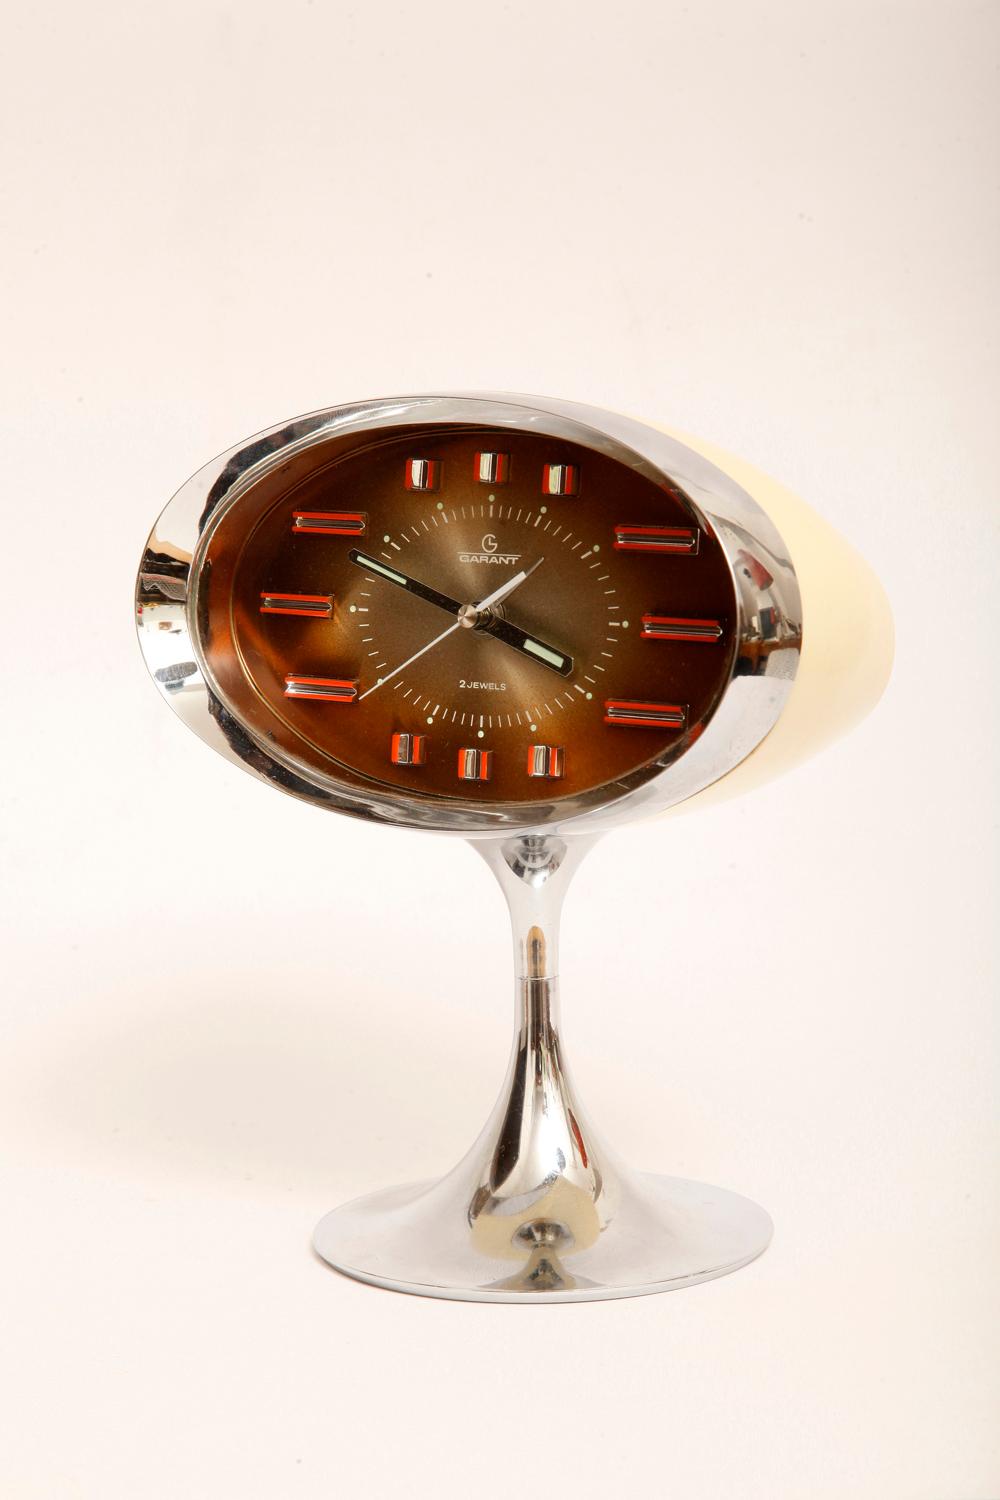 Japanese Space Age Alarm Clock Garant, Plastic and Chromed, 1970s For Sale 14